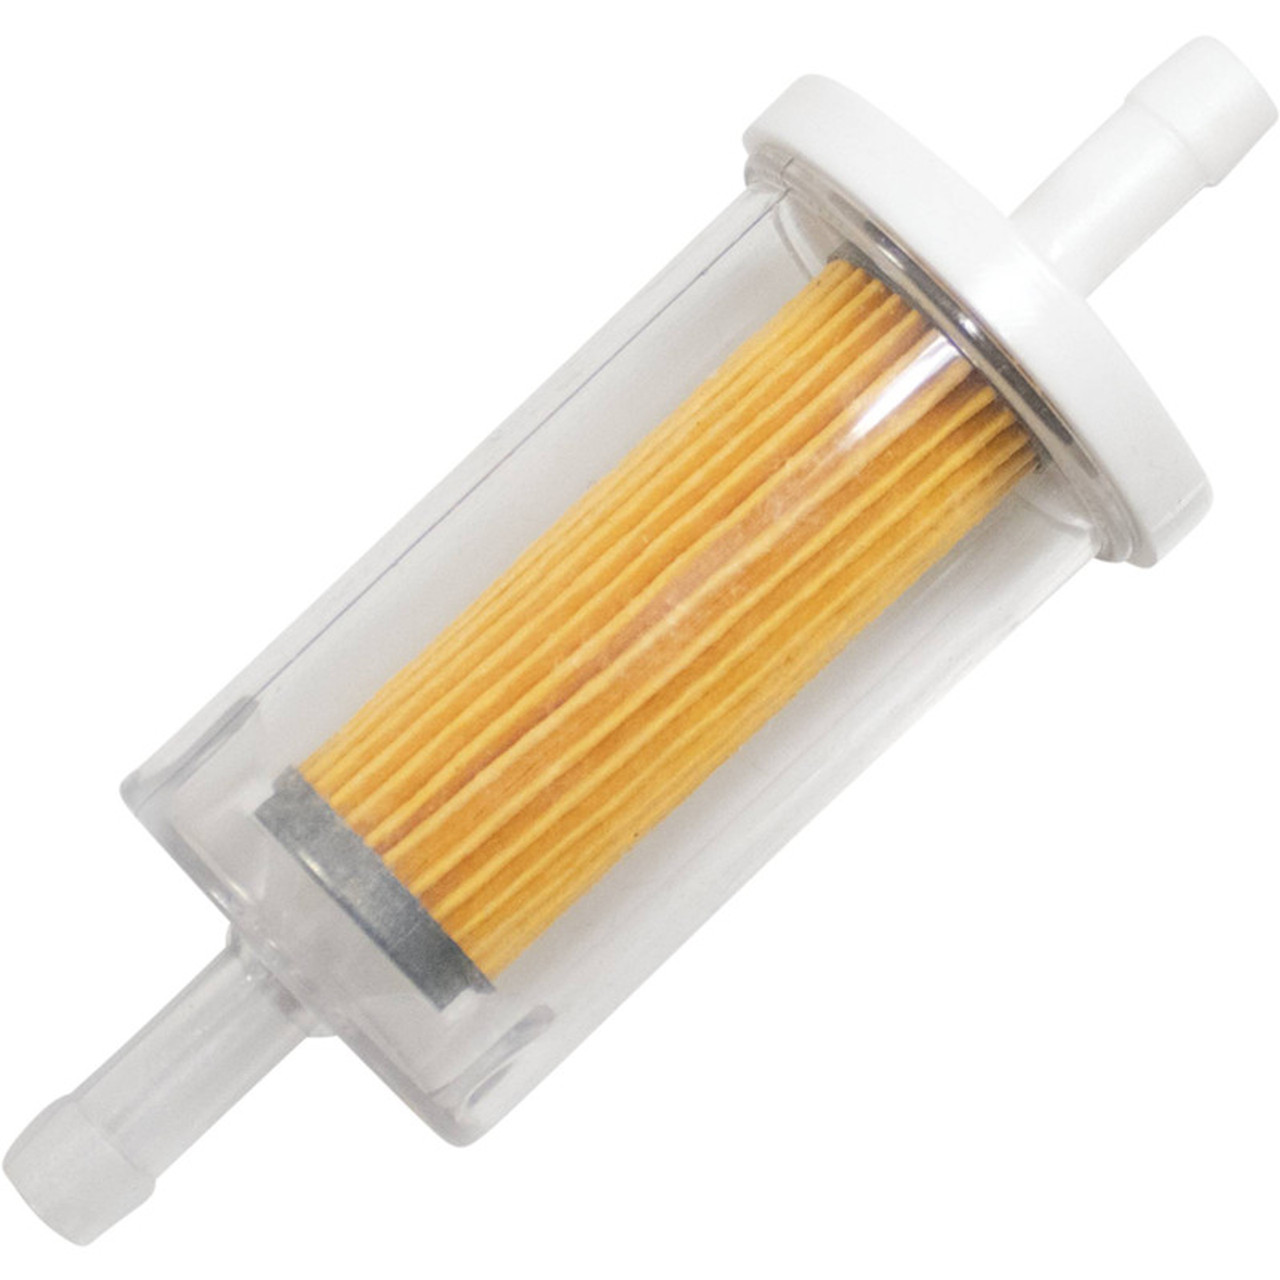 Fuel Filter for Briggs and Stratton 695666, 845125 &